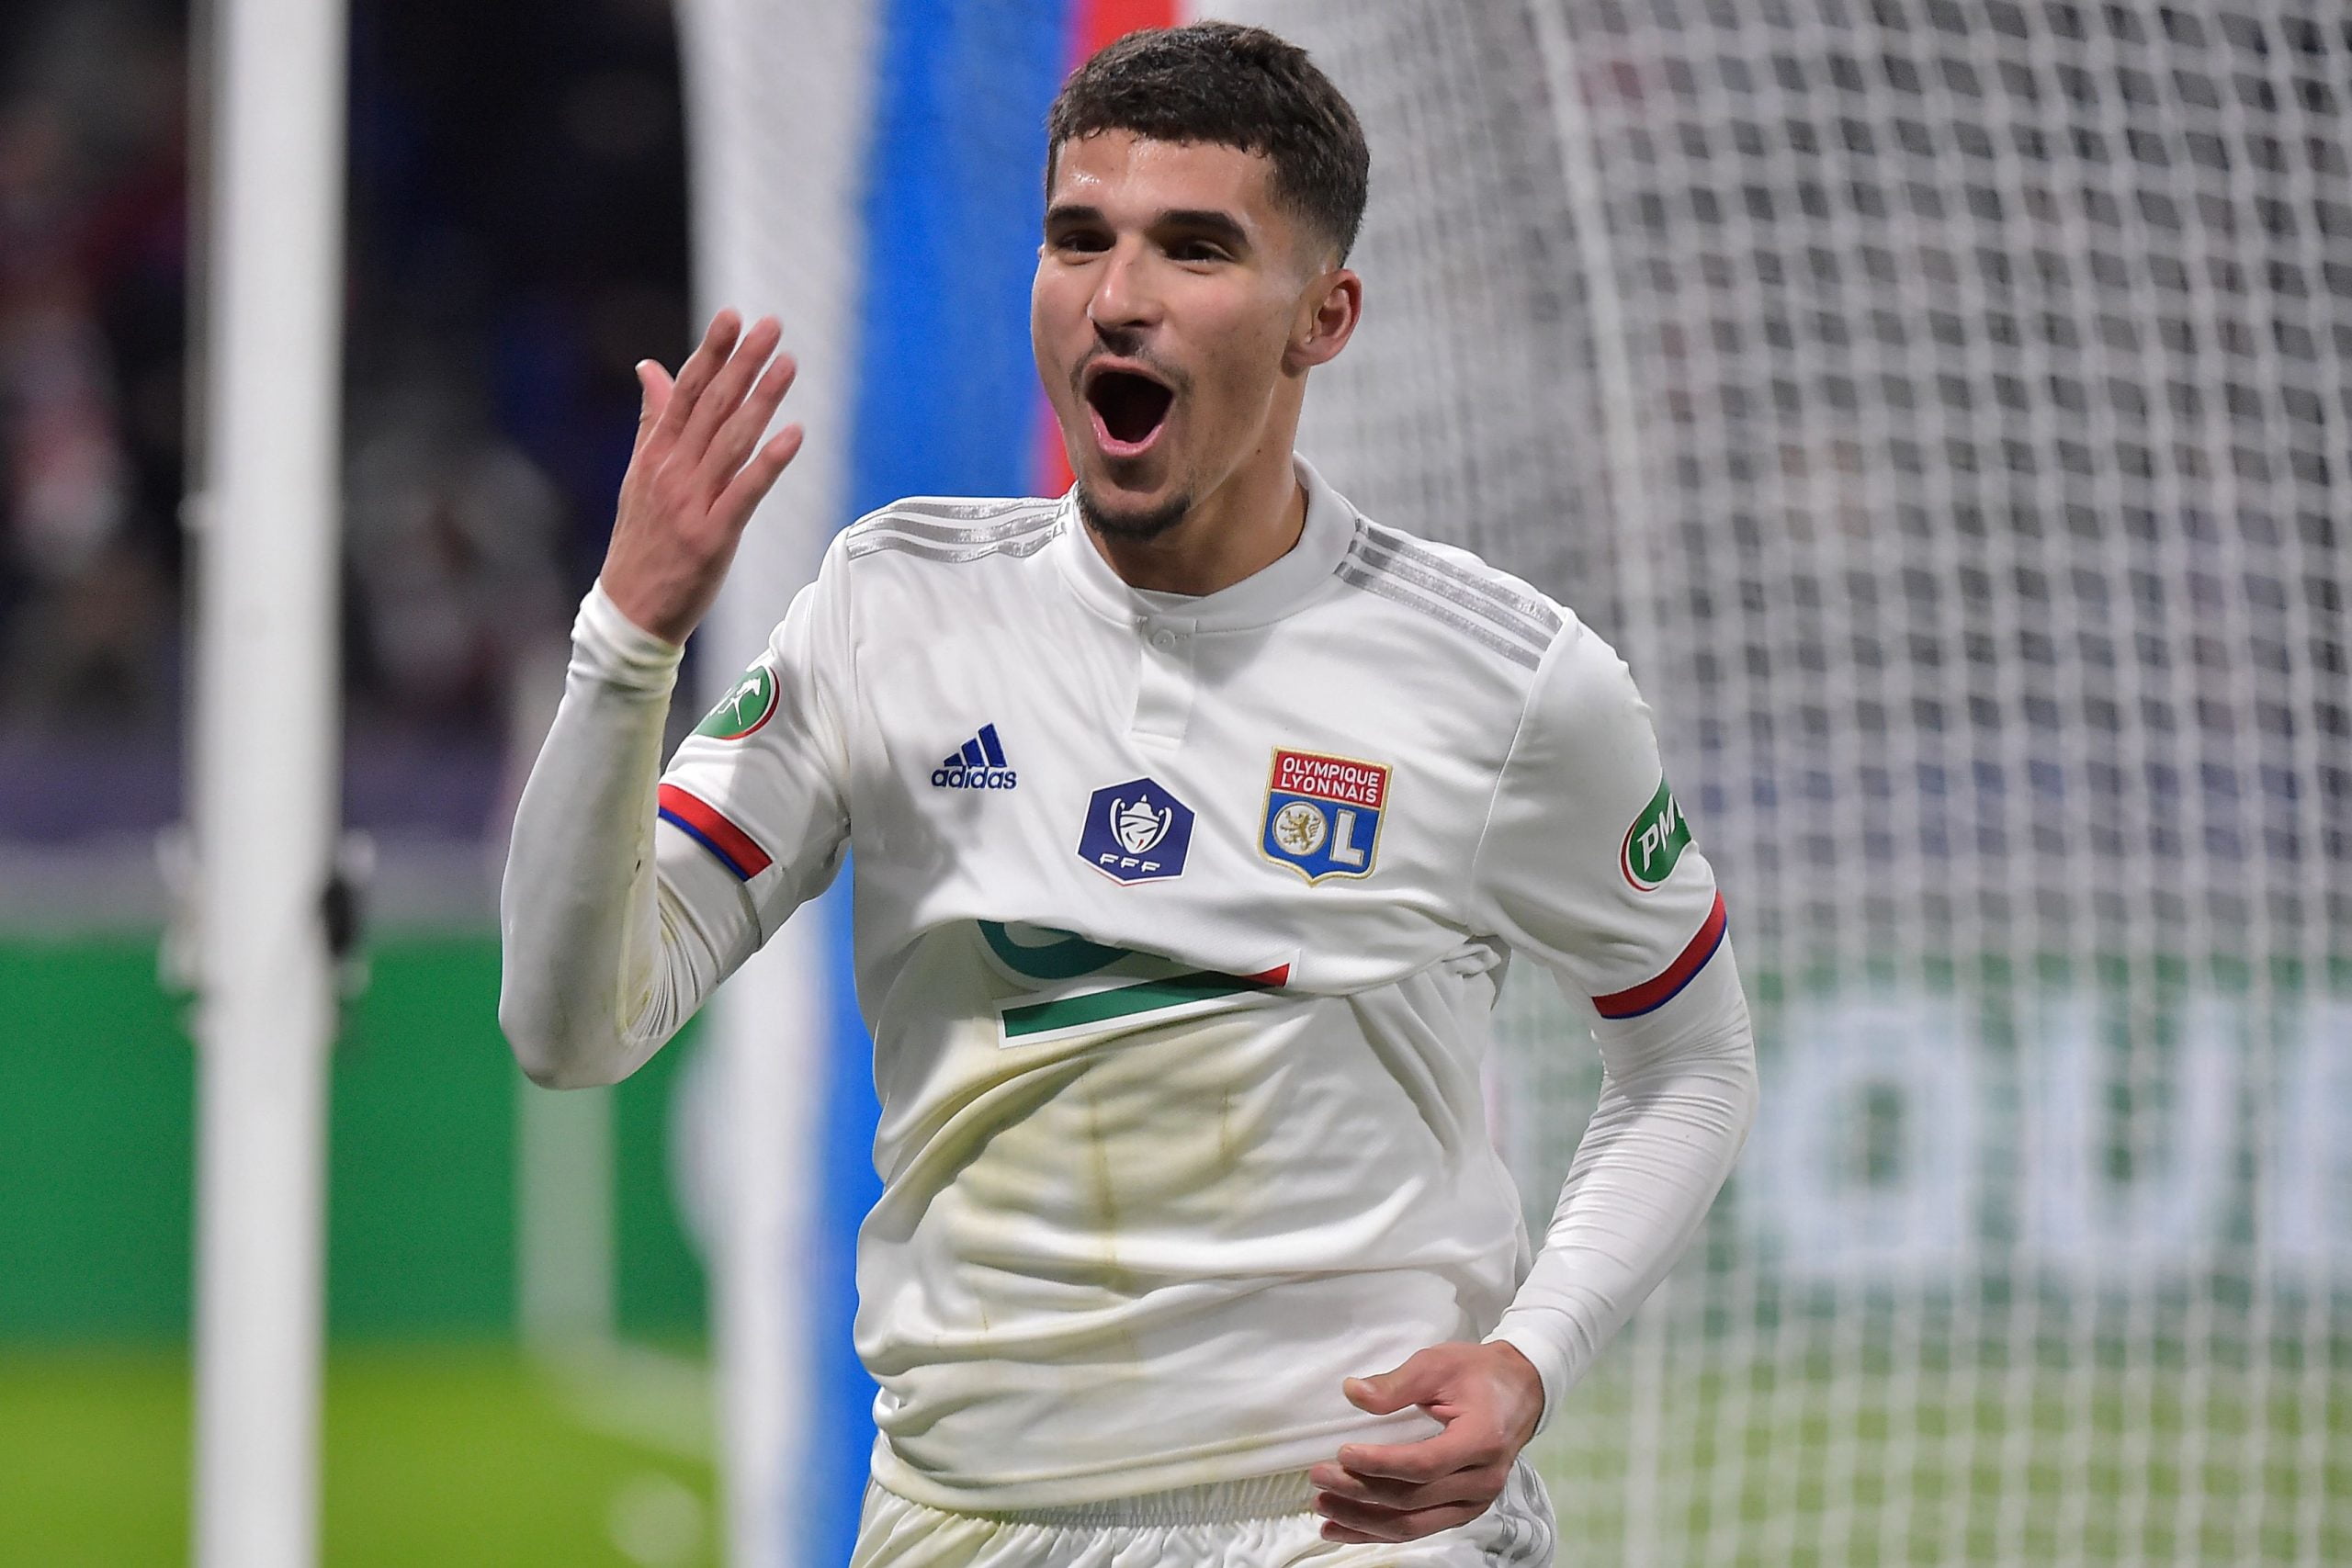 Arsenal have made a move to sign Houssem Aouar - A prime target.